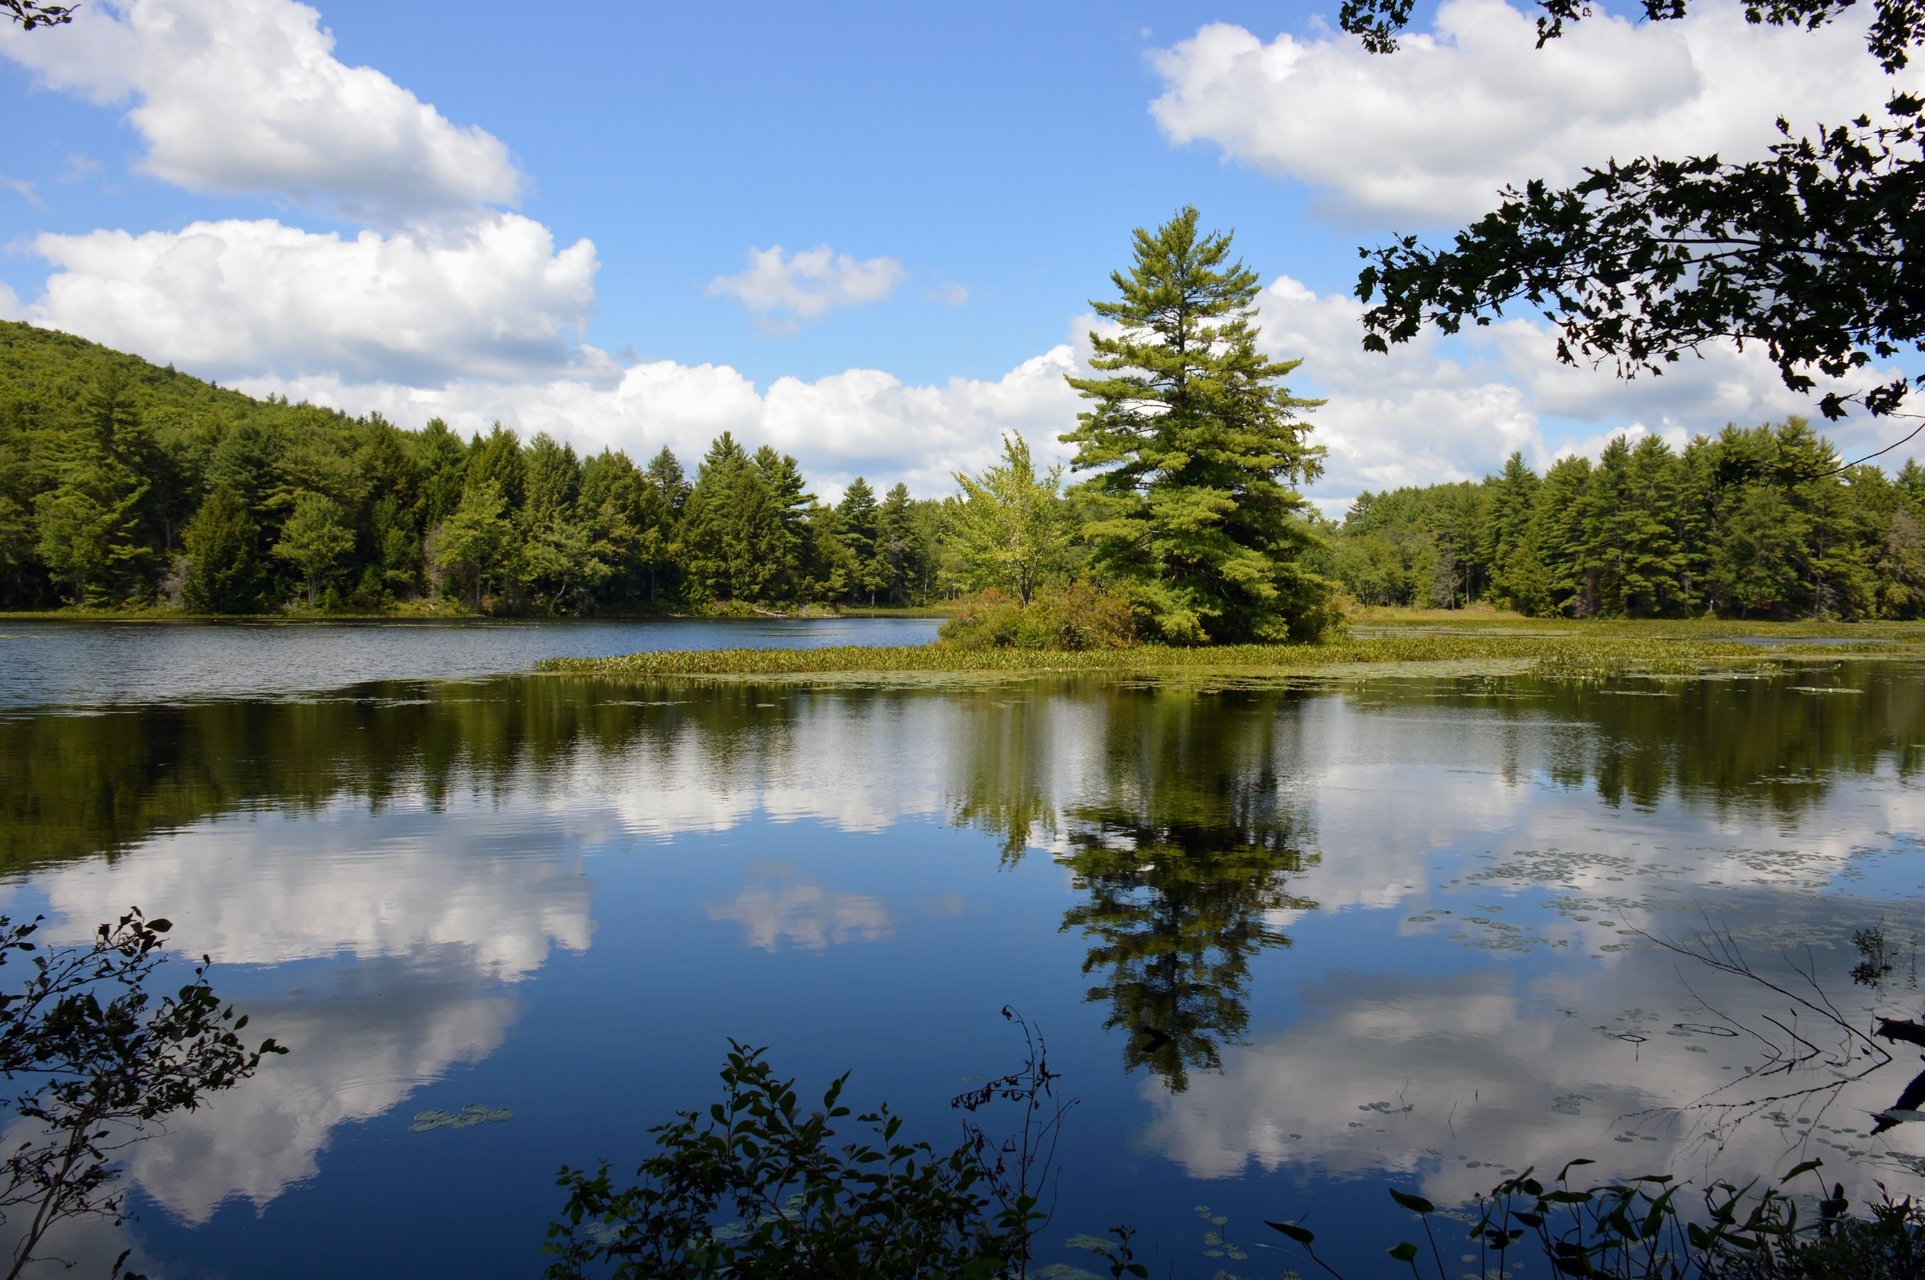 Pond reflects the blue cloudy sky and pine trees surrounding the banks.